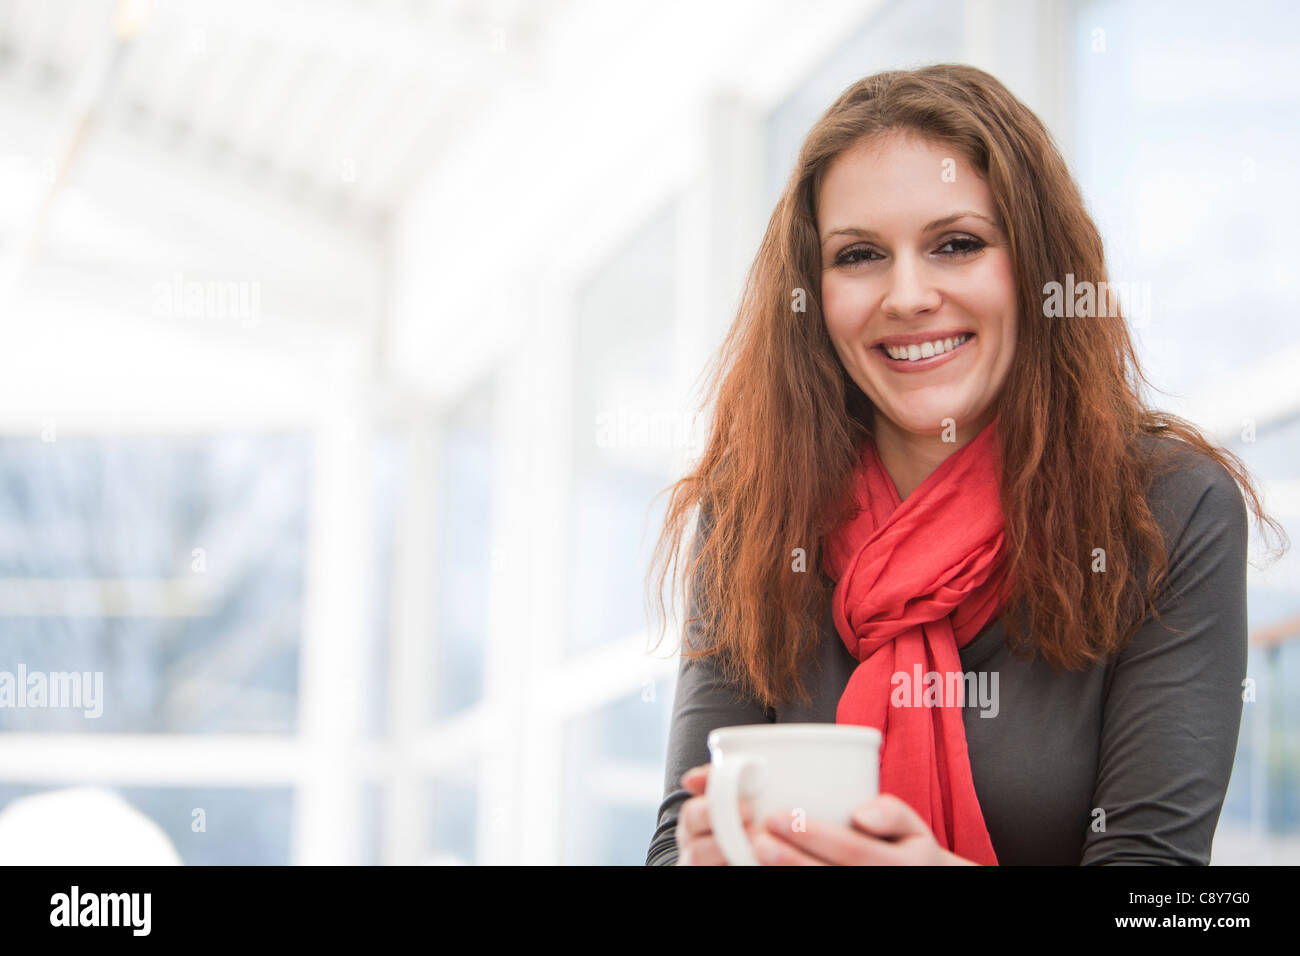 Portrait of young businesswoman holding cup Banque D'Images